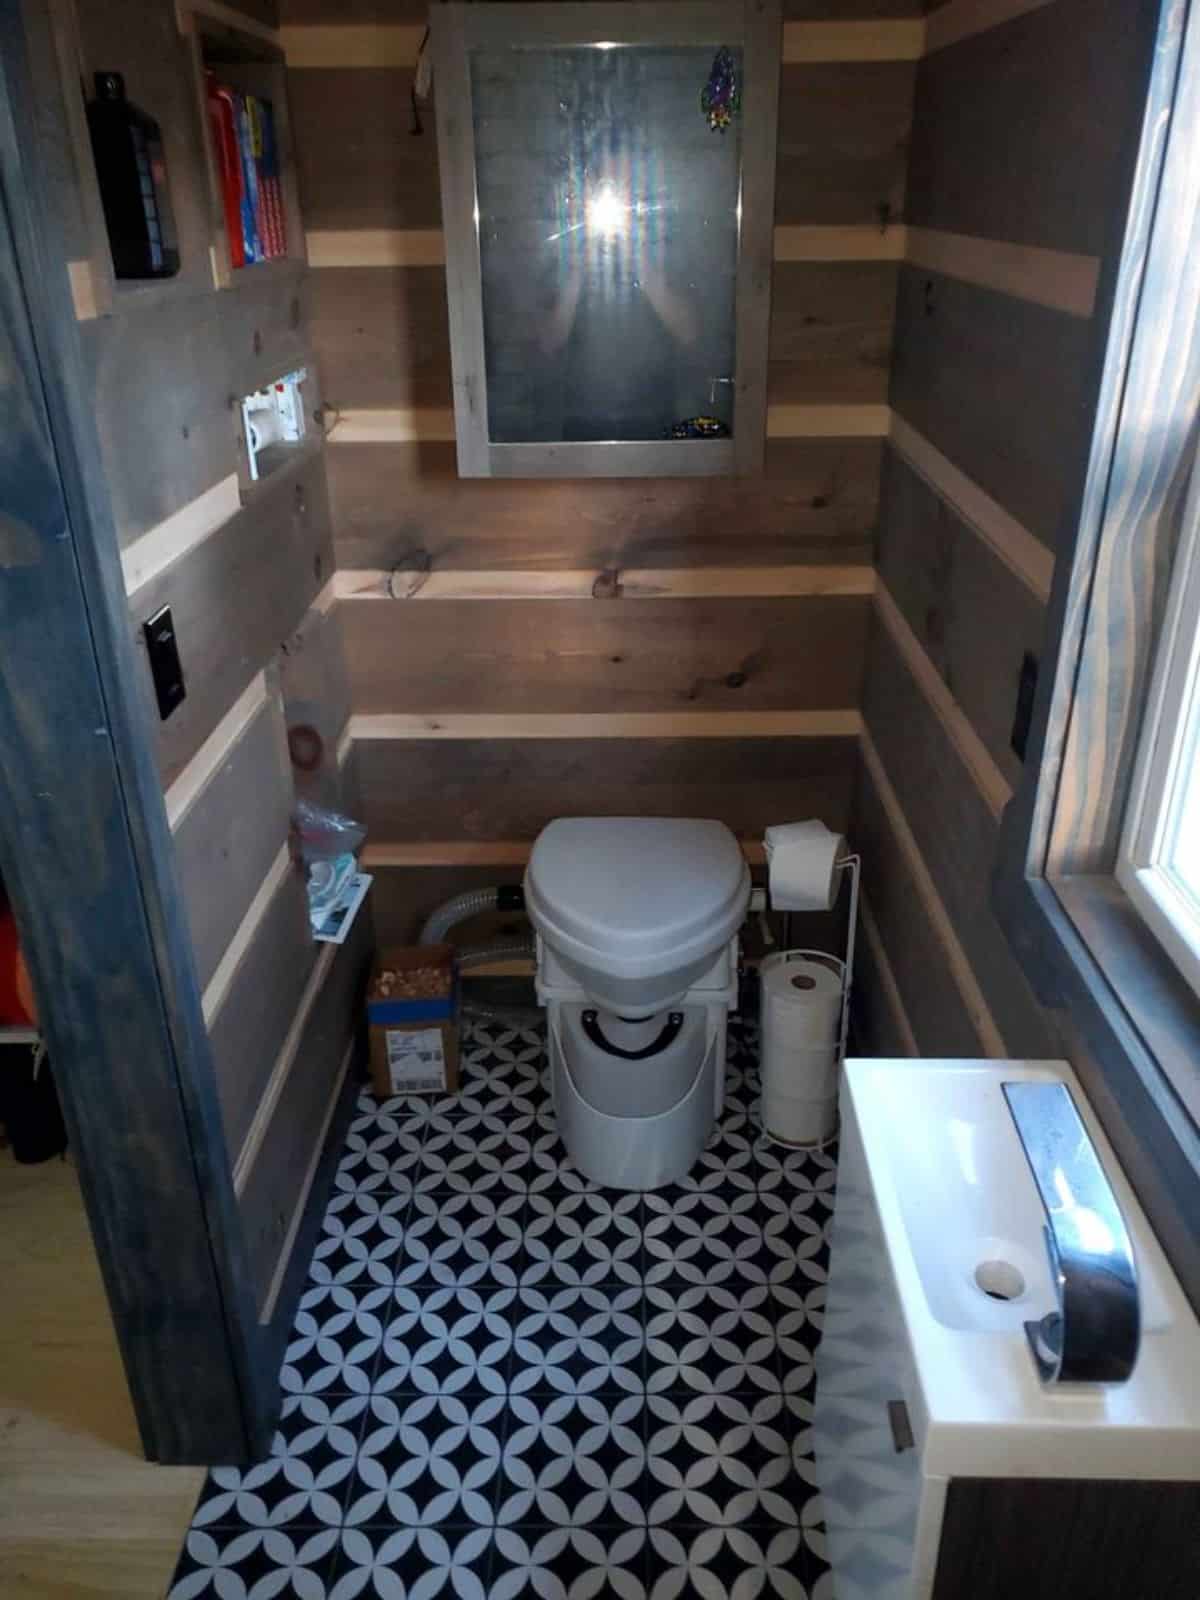 composting toilet, sink with vanity in bathroom of offgrid tiny home